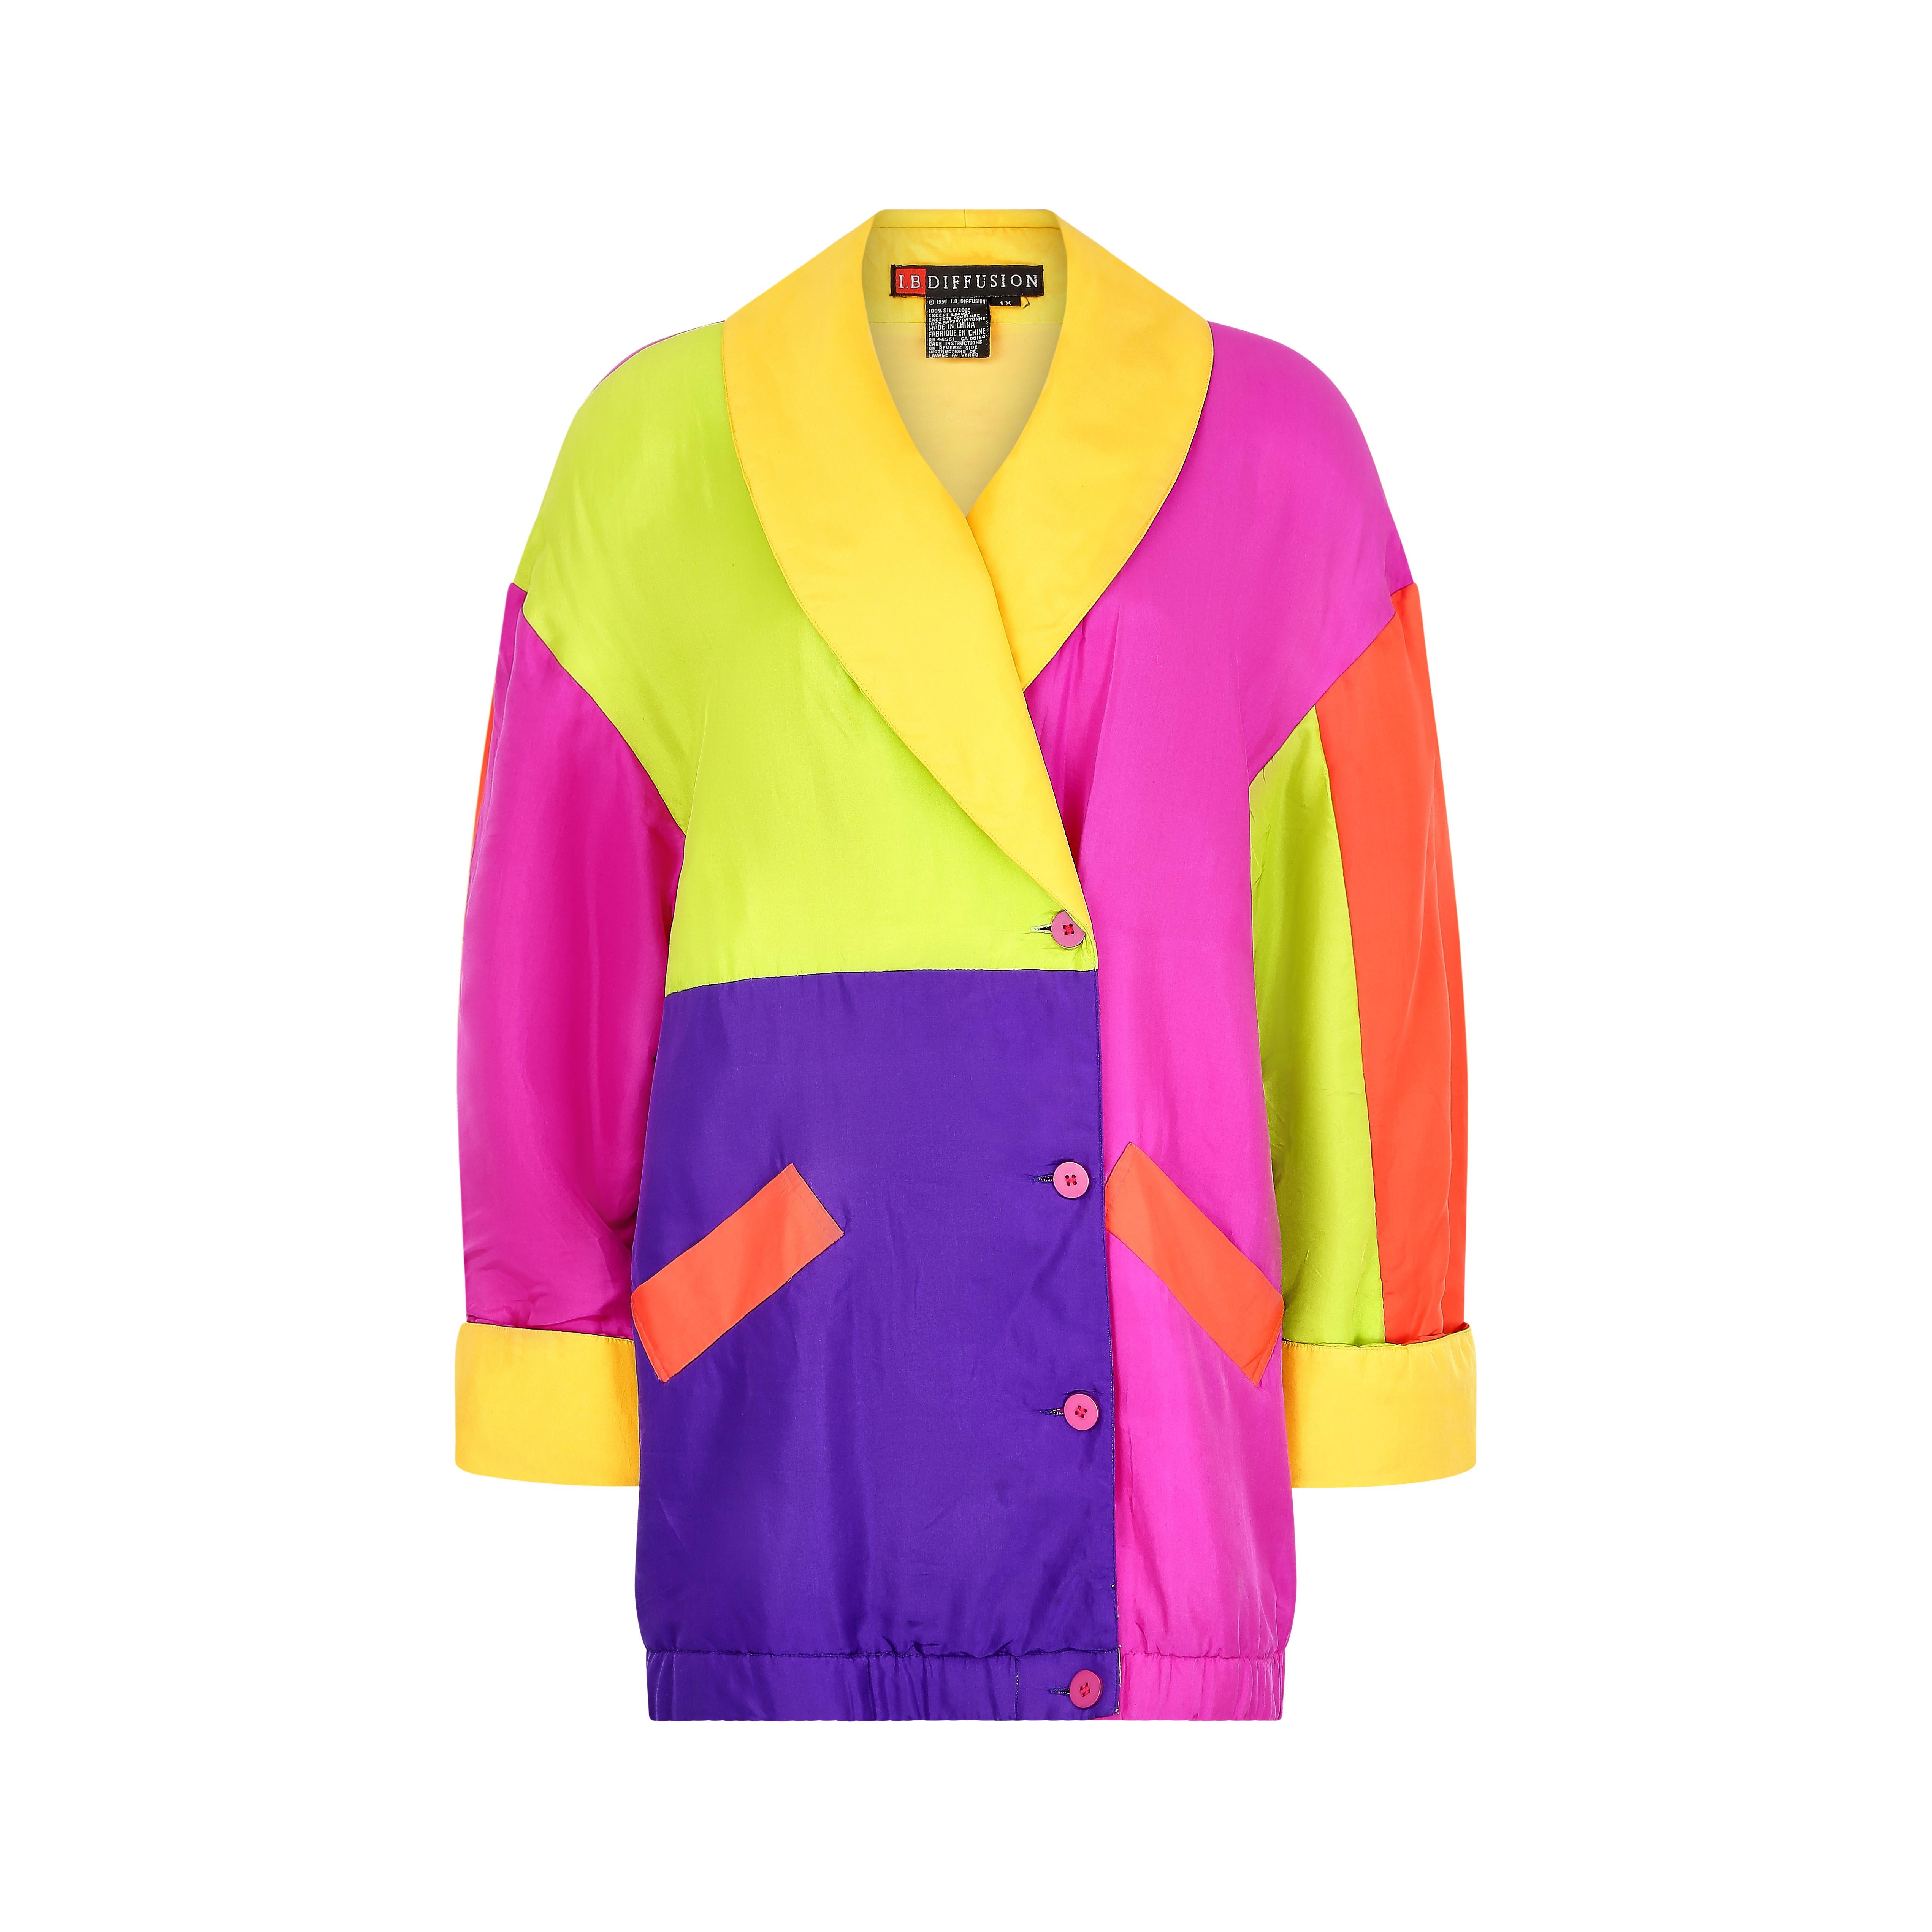 This is an outstanding multicoloured parka jacket dating to 1991, lightly padded and cut in an oversized bomber shape, with a large collar and turnback cuffs. The material is a very soft silk, with a colour block pattern featuring shades of hot